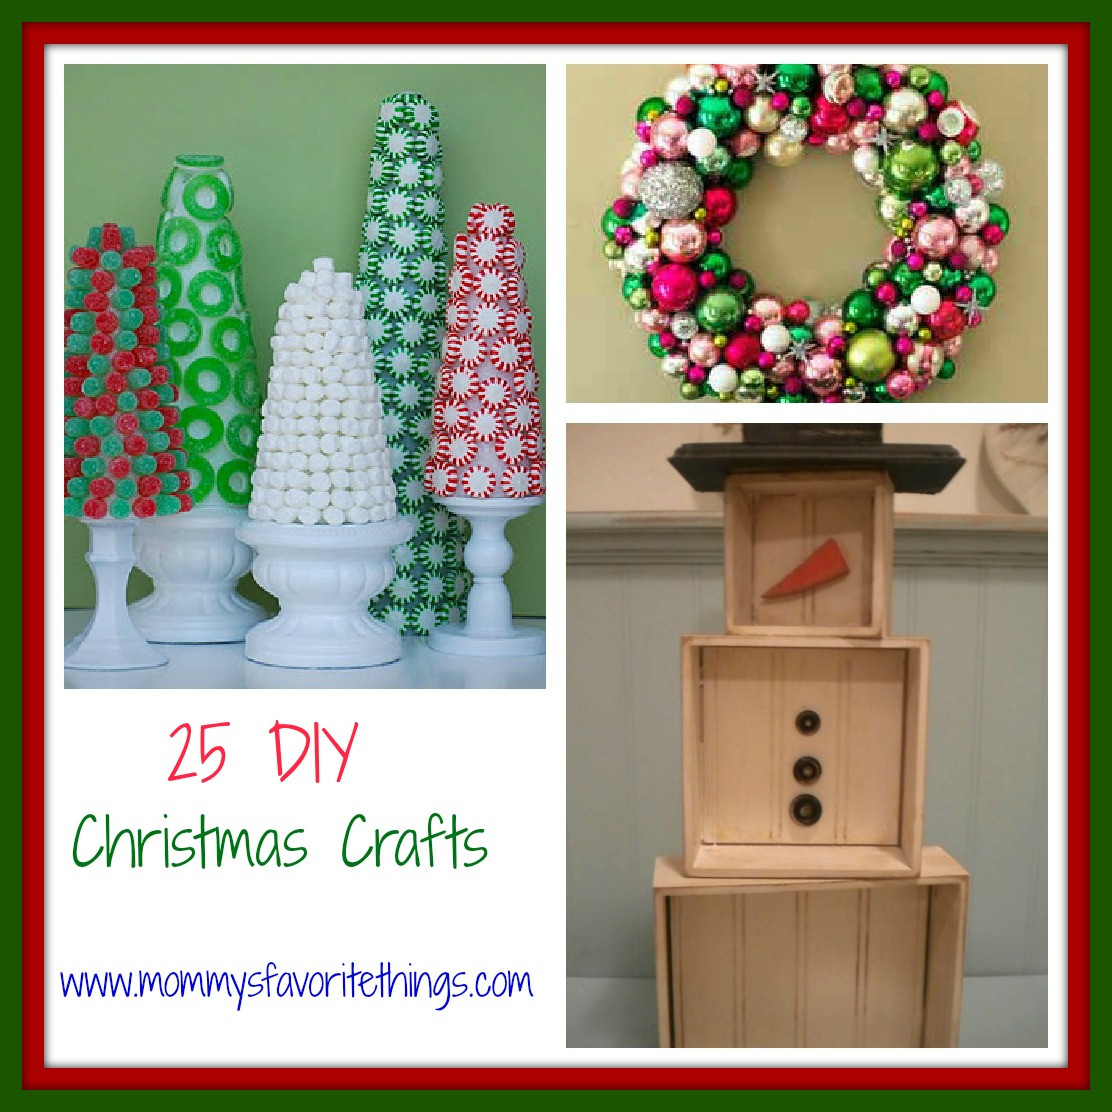 Christmas Crafts DIY
 Mommy s Favorite Things 25 DIY Christmas Crafts